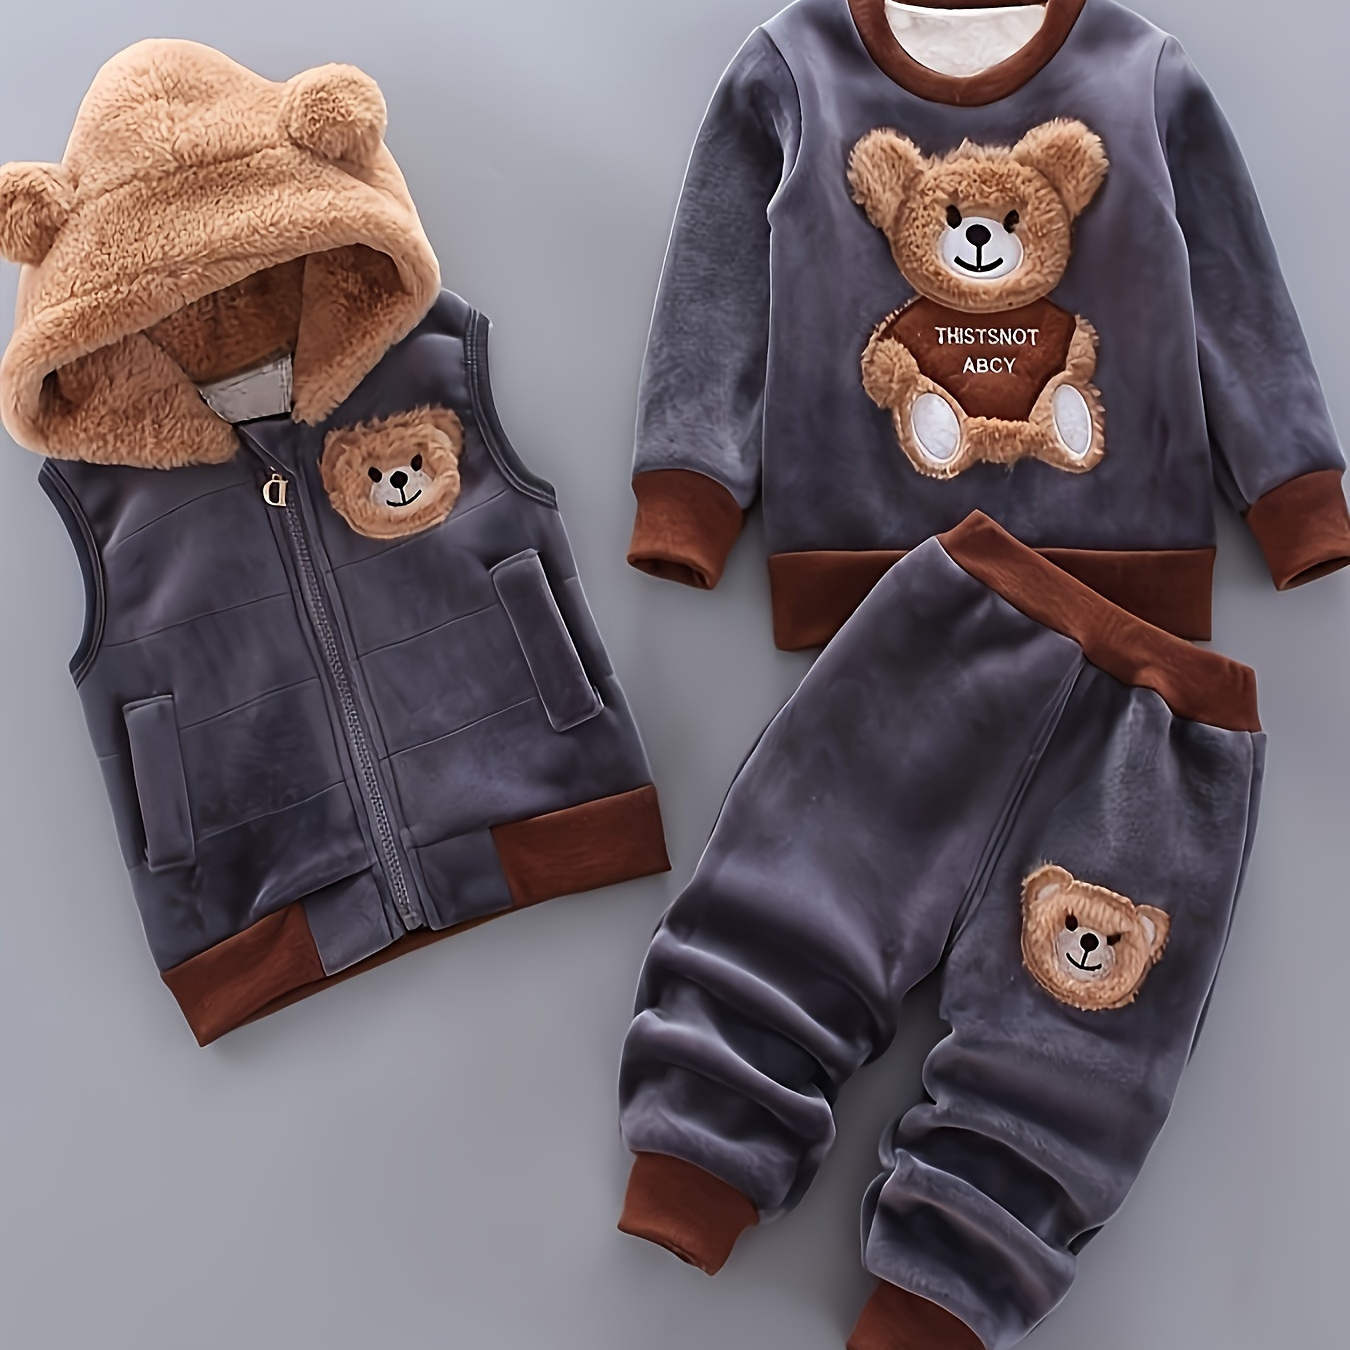 

Baby's Animal Embroidered 2pcs Warm Fall Winter Outfit, Hooded Vest & Velvet Sweatshirt & Jogger Pants Set, Toddler & Infant Boy's Clothes